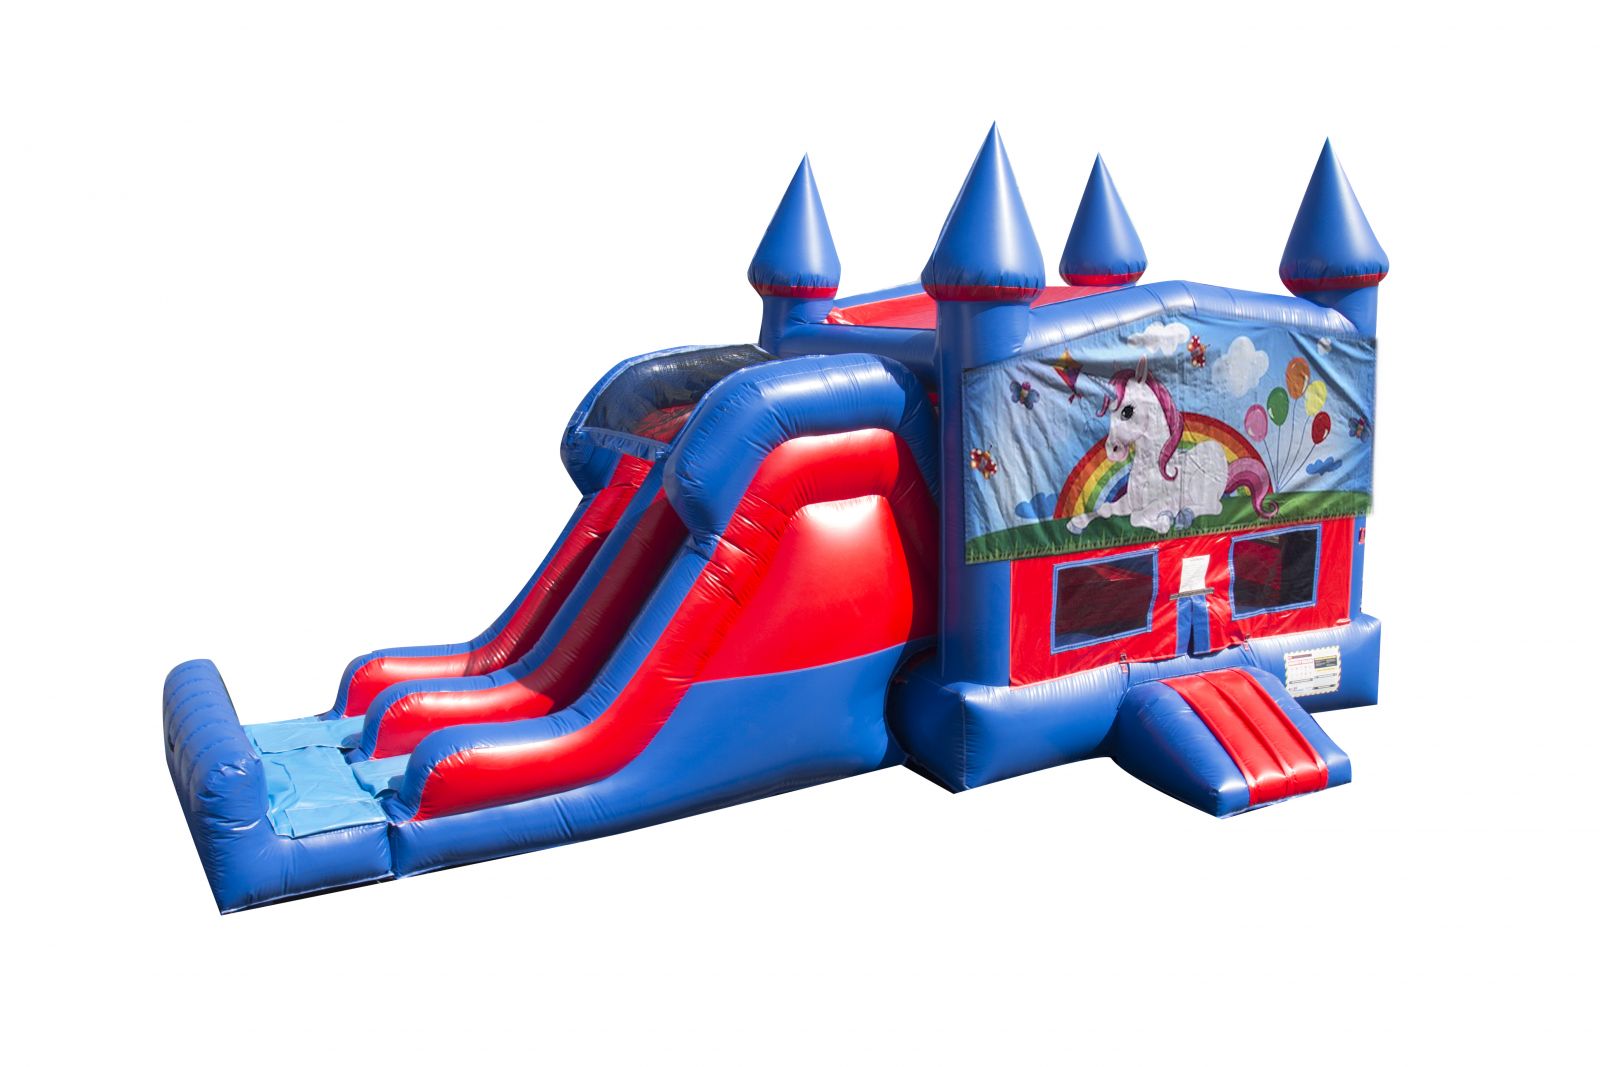 Unicorn 7' Double Lane Dry Slide Combo with Bounce House In Maurice